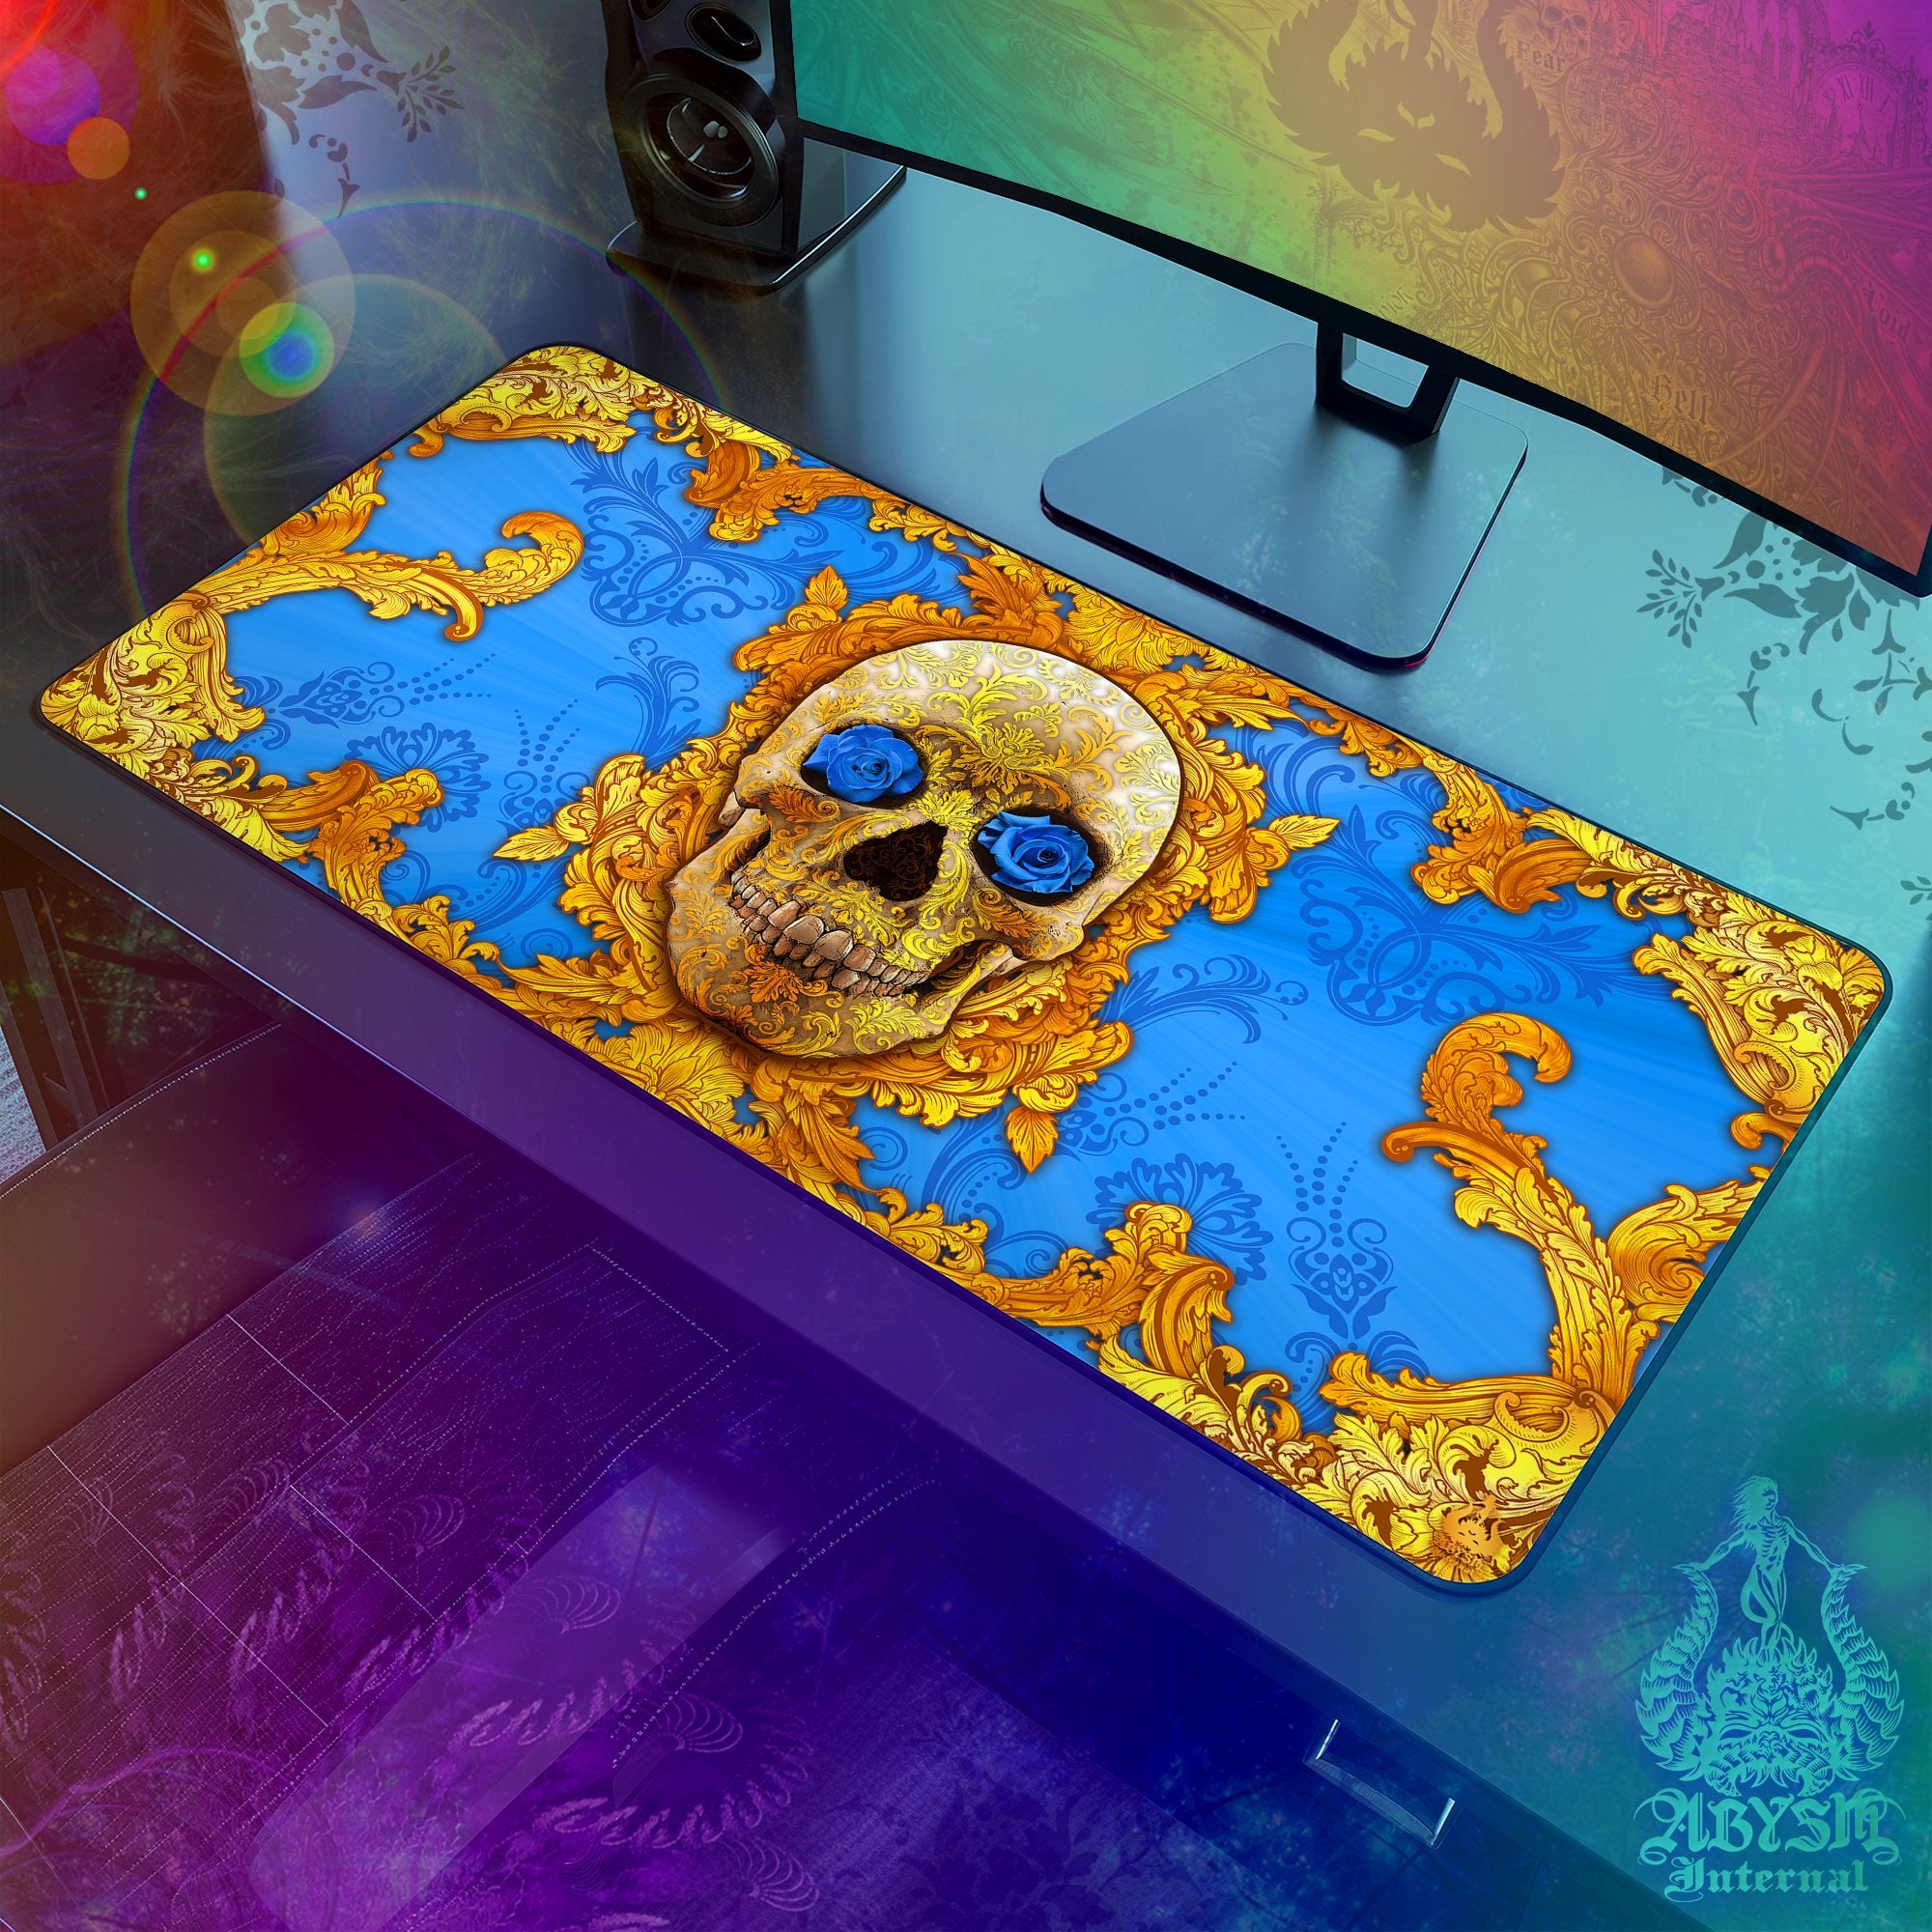 Gold Skull Desk Mat, Cyan Gaming Mouse Pad, Baroque Table Protector Cover, Blue Roses Workpad, Ornamented Art Print - Abysm Internal